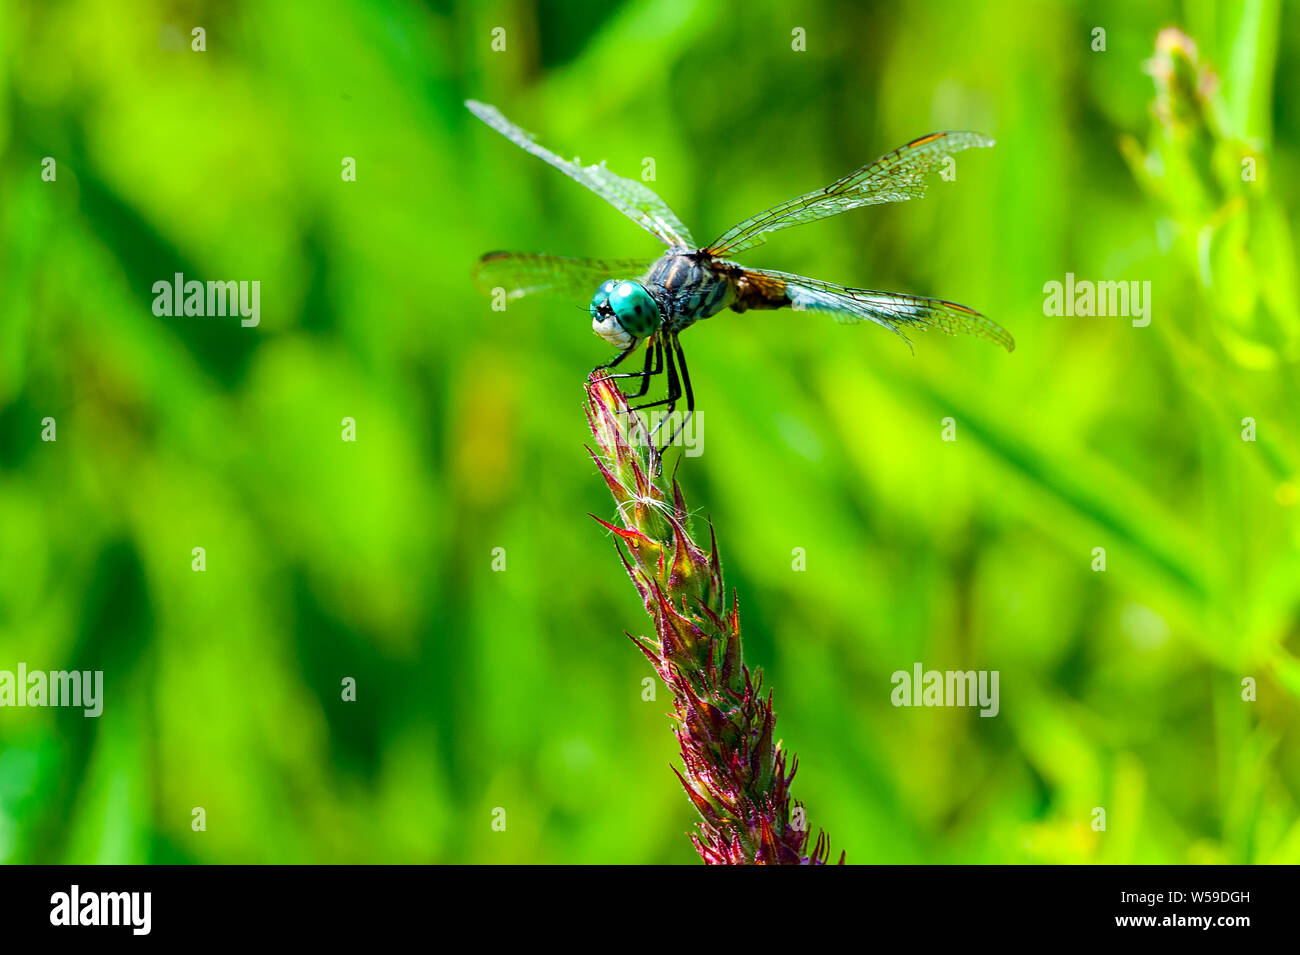 Closeup macro shot of Blue Darner dragonfly holding onto a plant in a Great Meadows National Park. Stock Photo